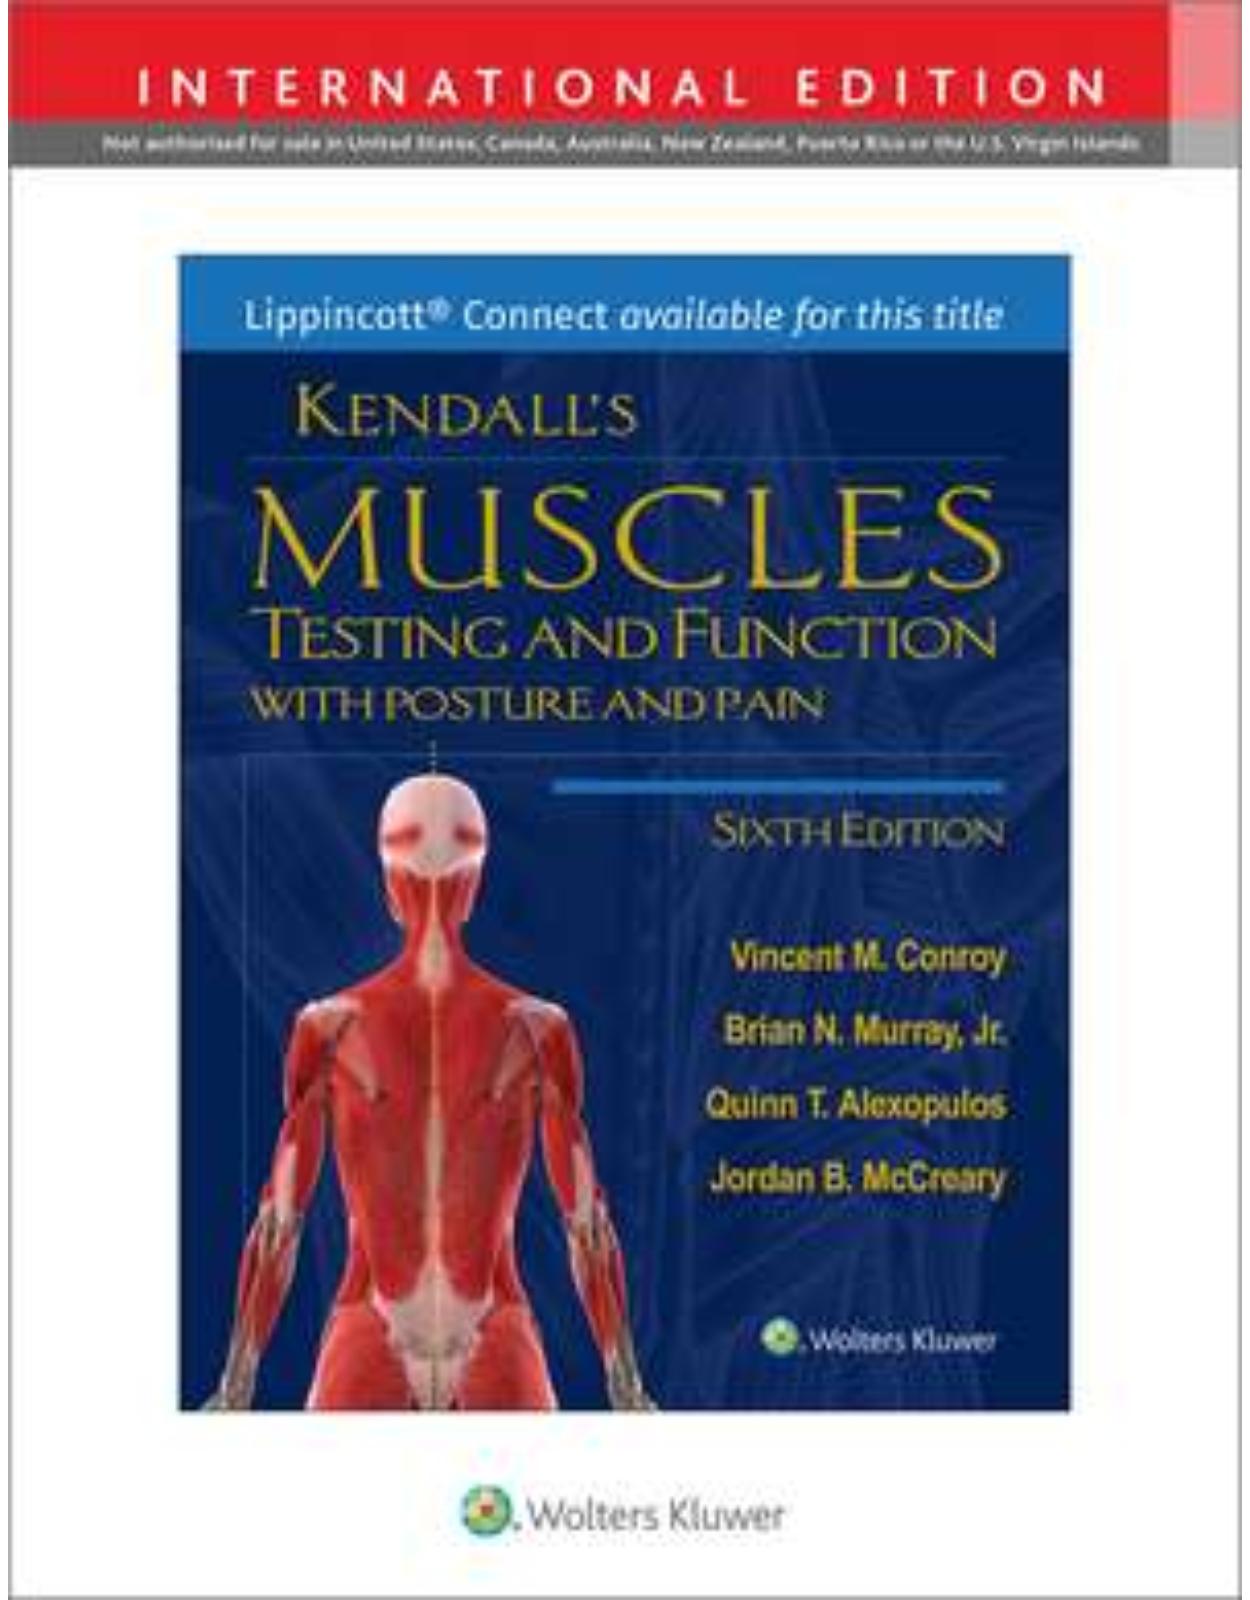 Kendall’s Muscles: Testing and Function with Posture and Pain